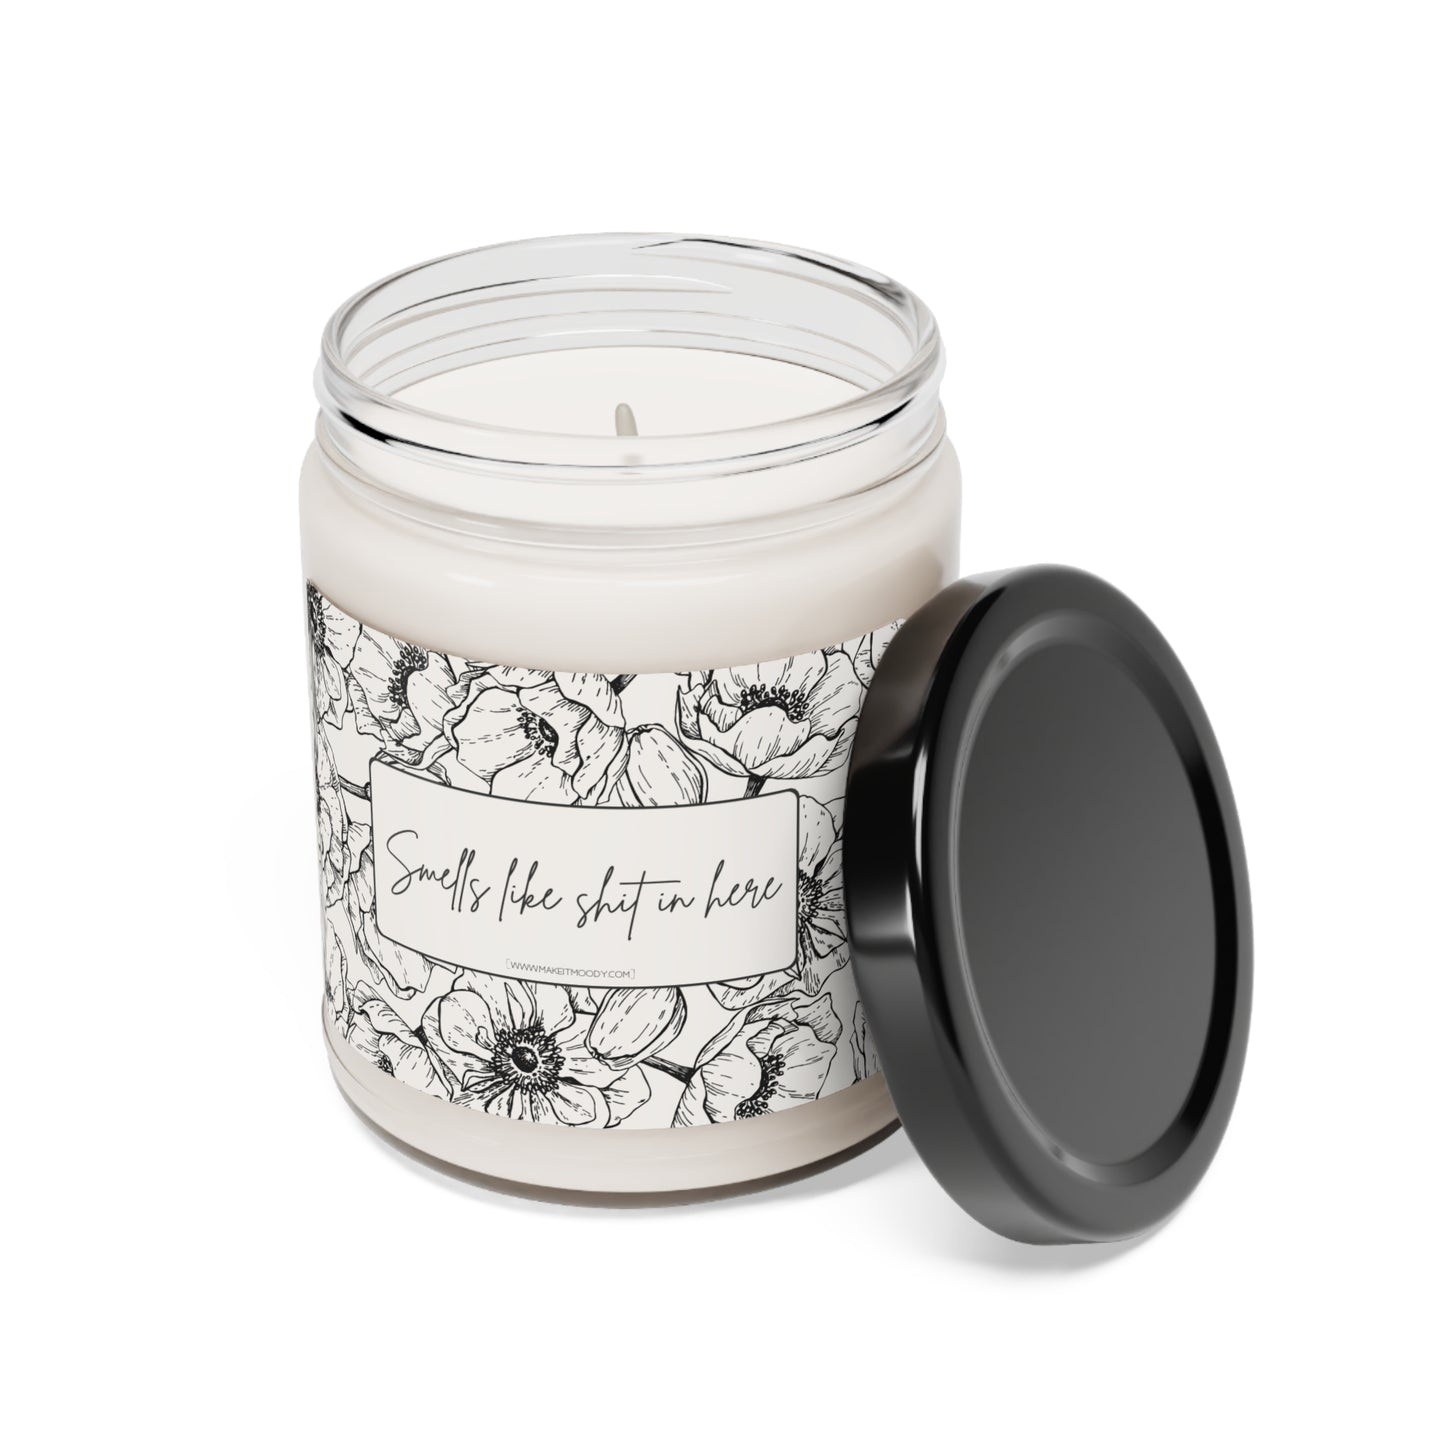 "Smells Like Shit in Here" Scented Soy Candle, 9oz